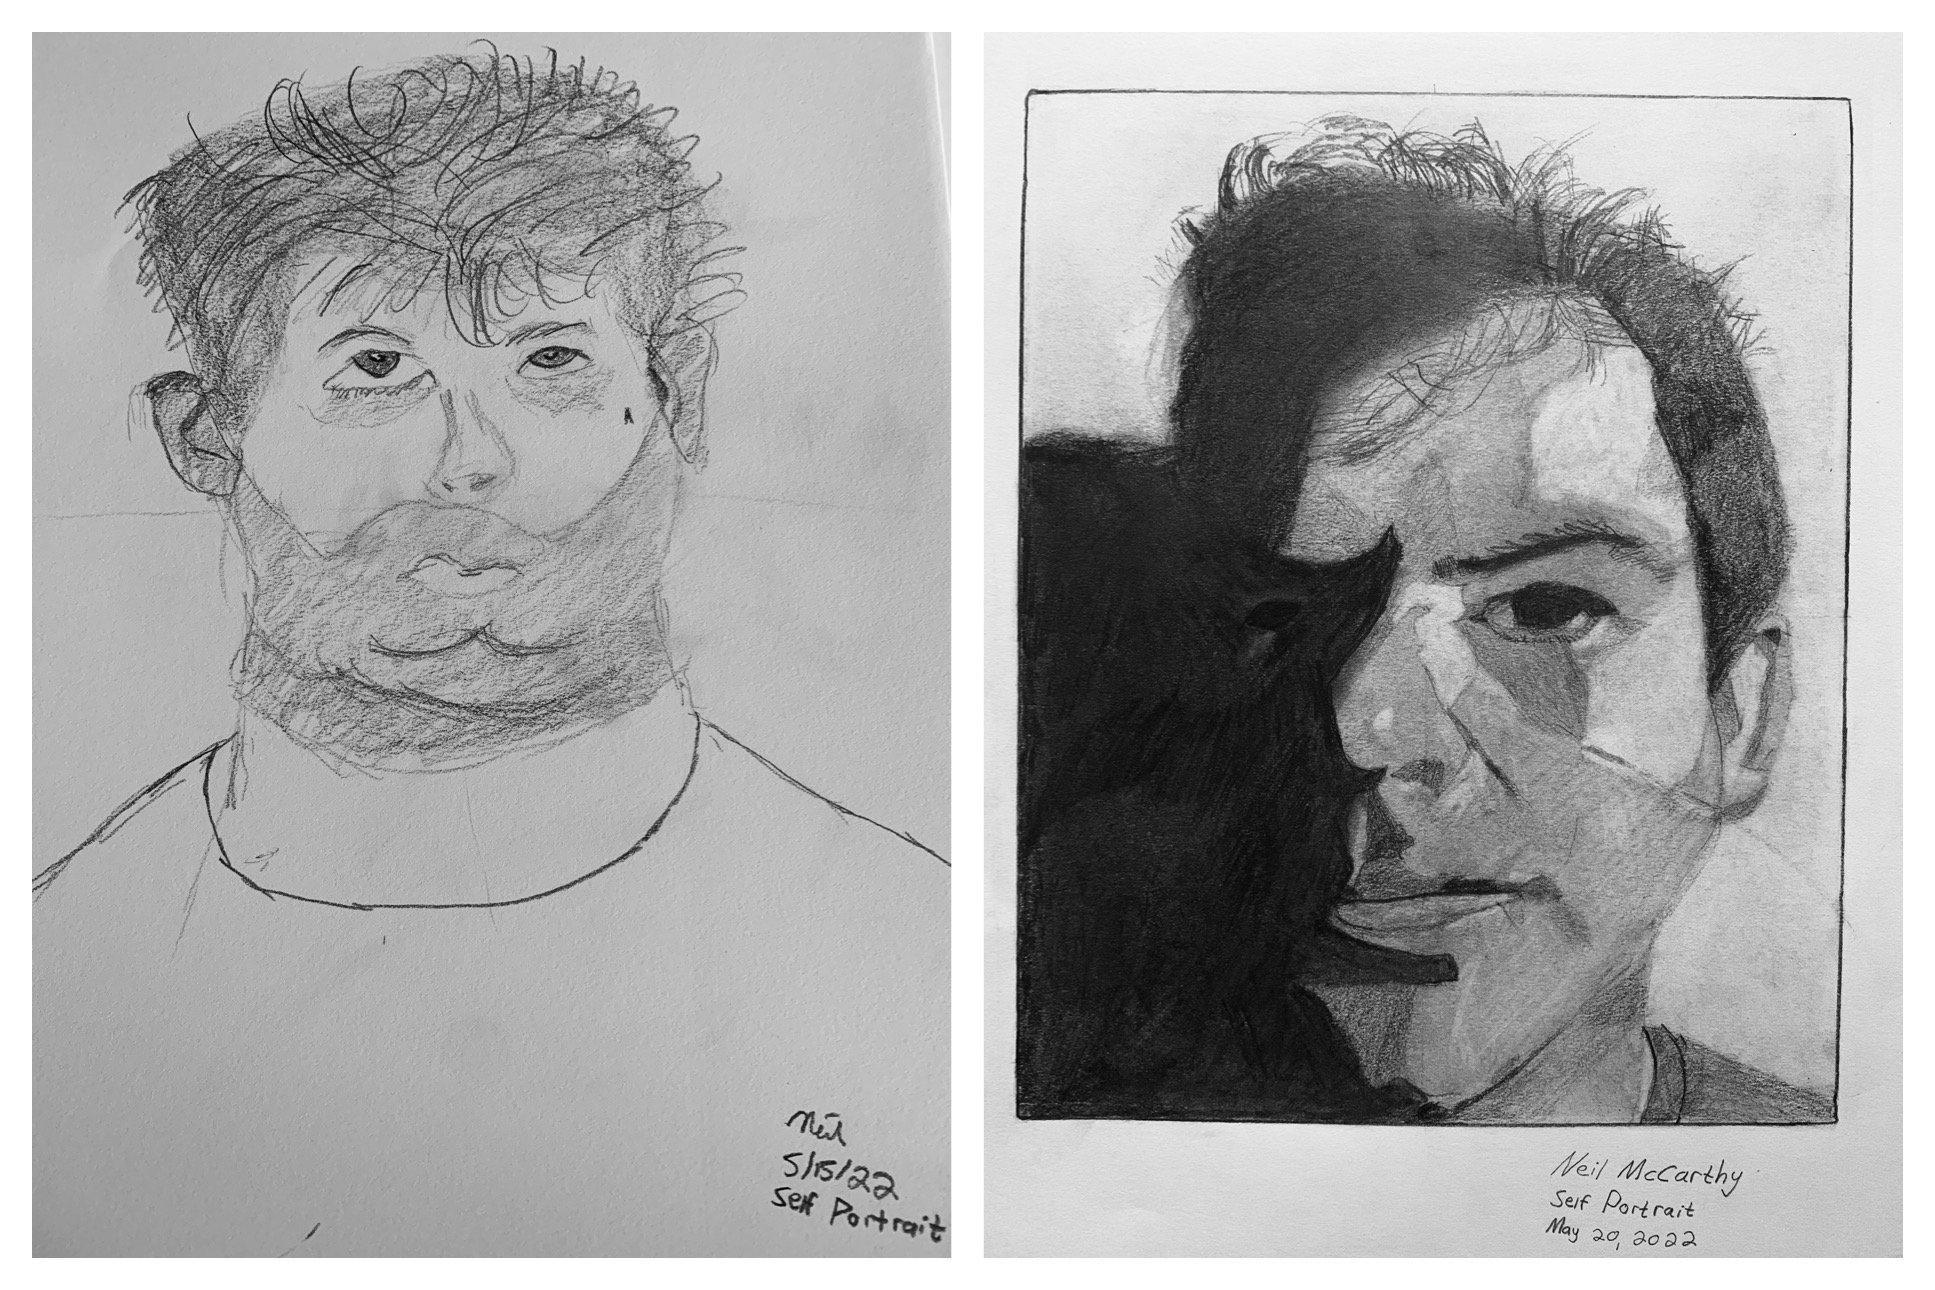 Neil's Before and After Self-Portraits